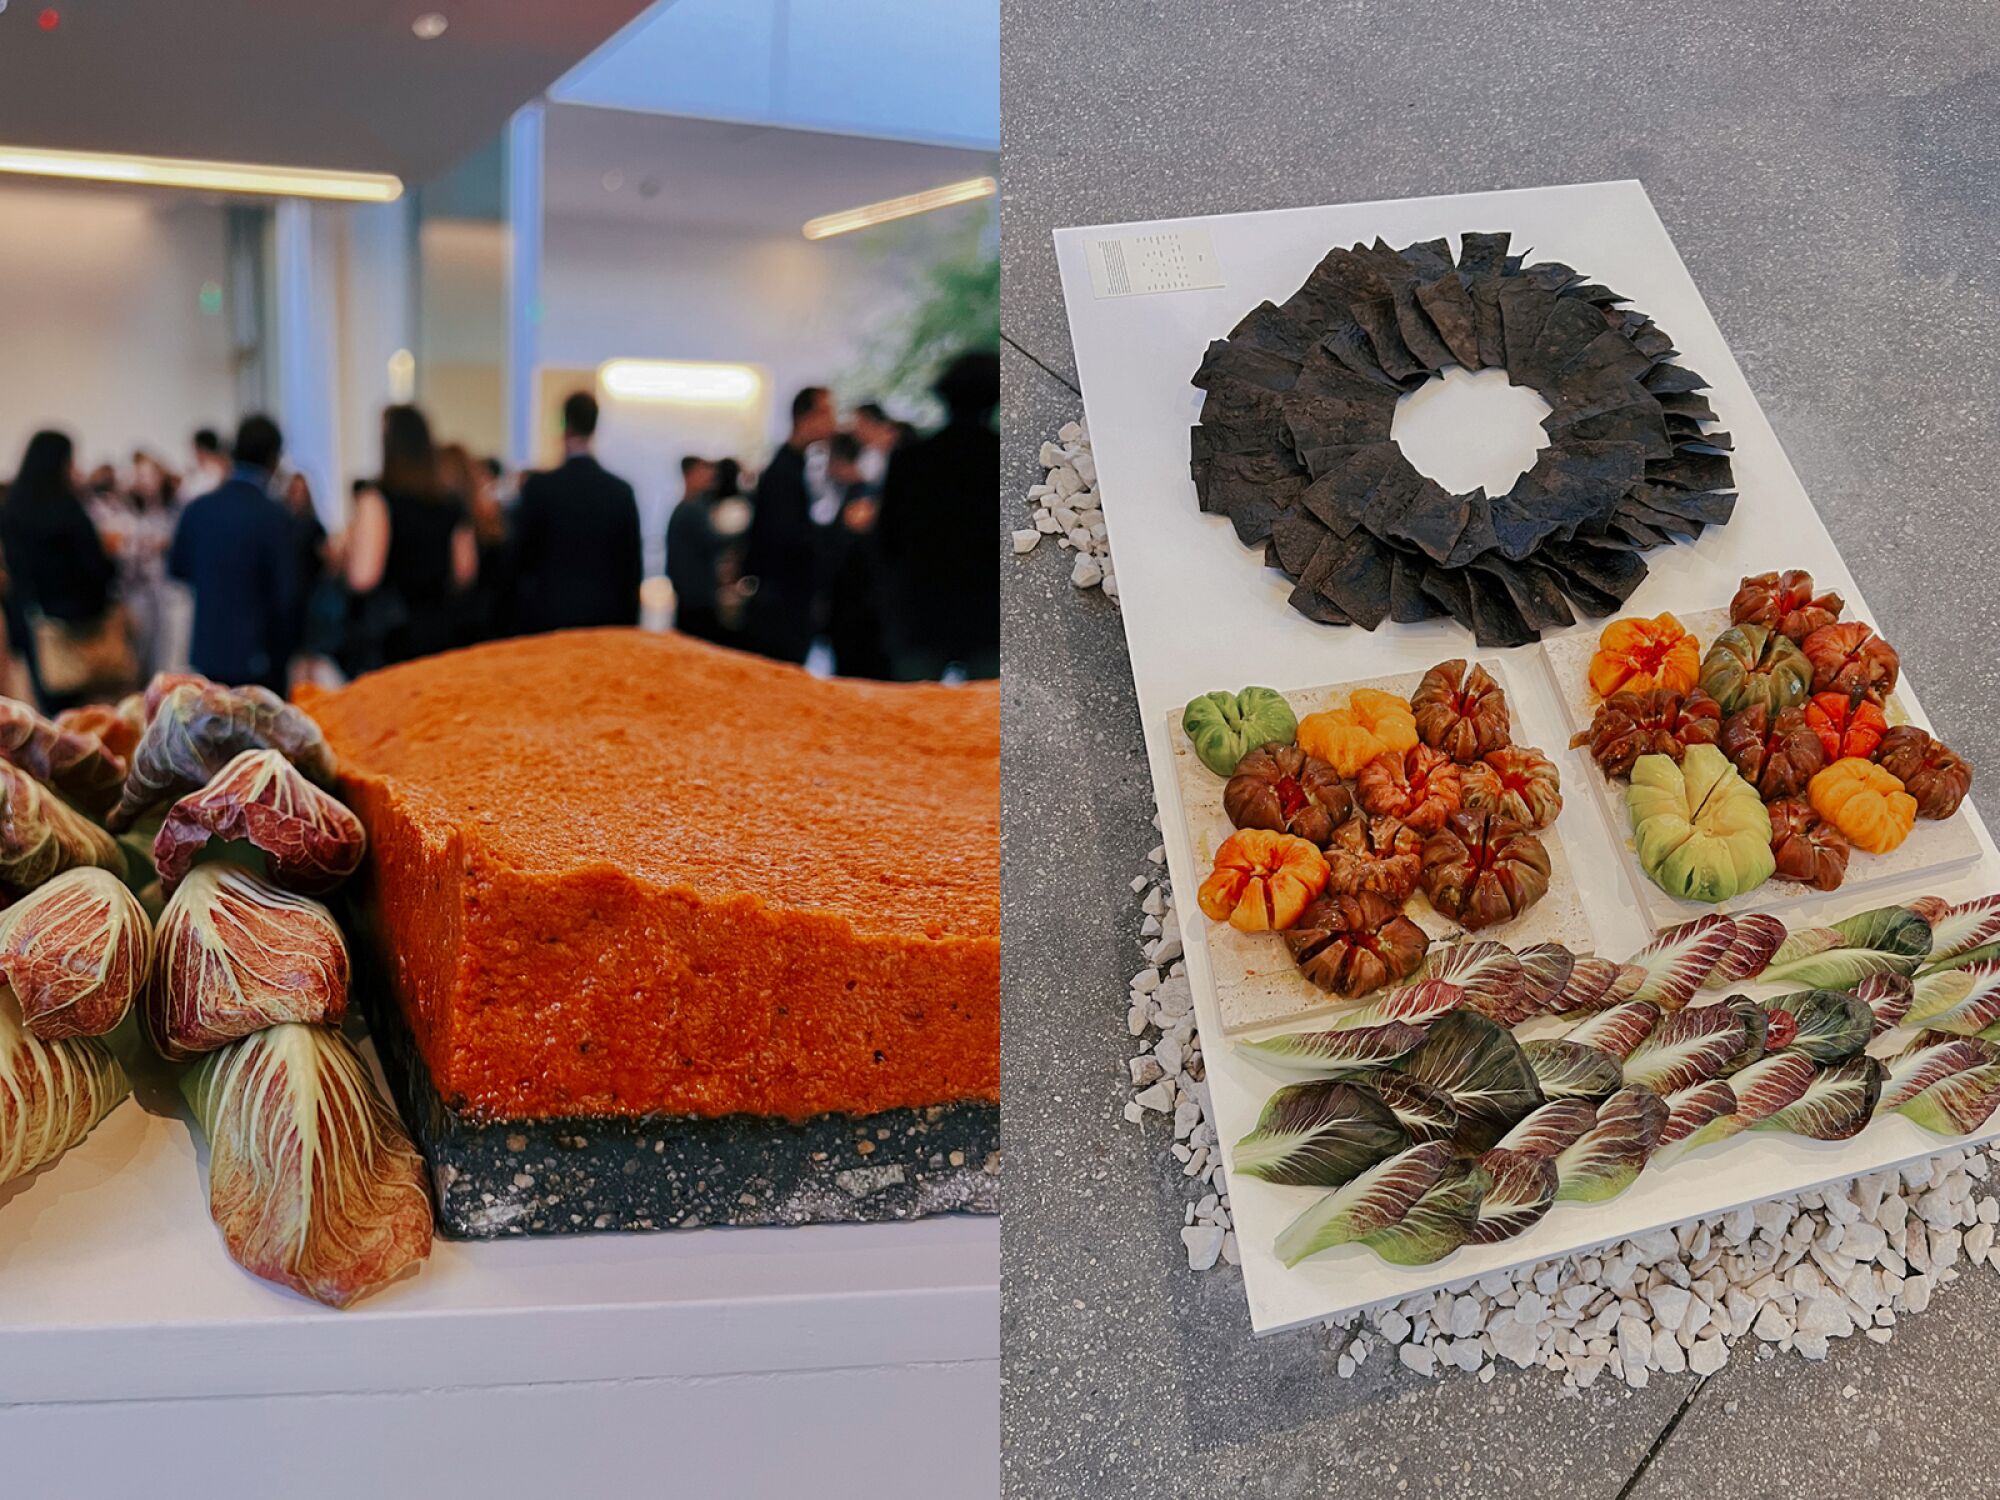 Images of sobrasada and charcoal corn crackers and heirloom tomatoes side by side in a museum-style display.